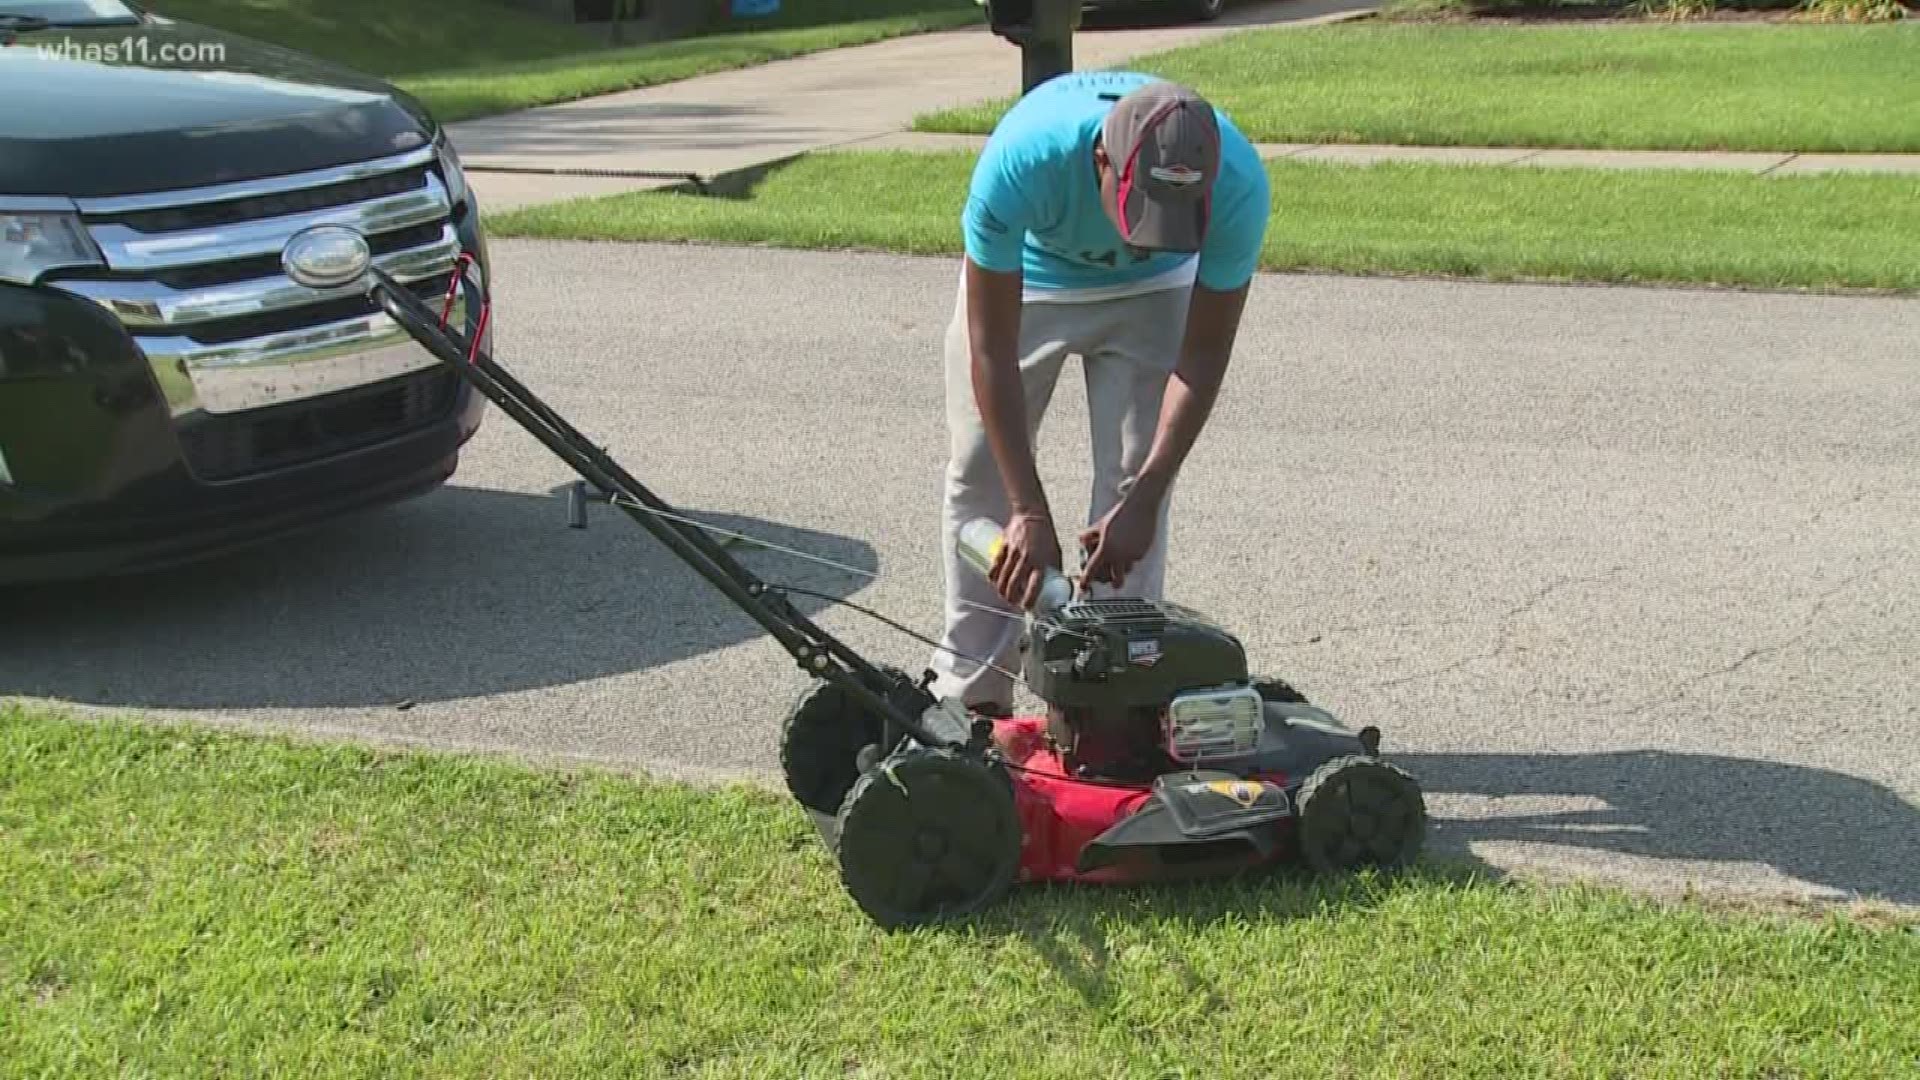 Rodney Smith mows lawns but there's a catch. While mowing lawns can be a profitable business, Smith said he mows lawns for free for people in need. He's traveling the country in hopes of encourage kids to join him in lending a helping hand.